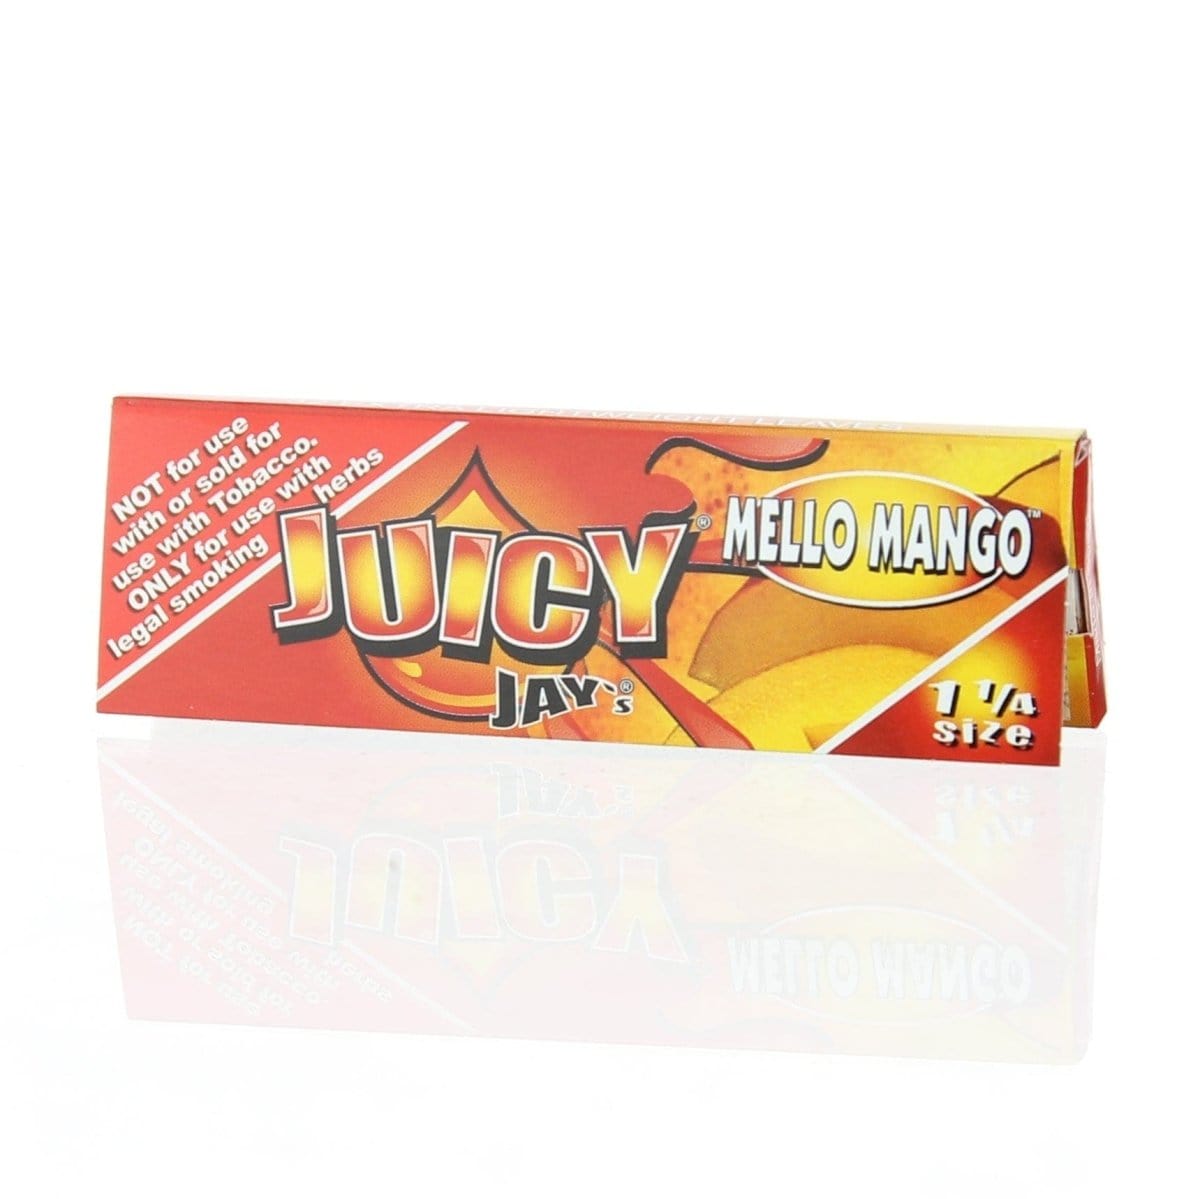 HBI Papers Mello Mango Juicy Jay's 1 1/4 Rolling Papers